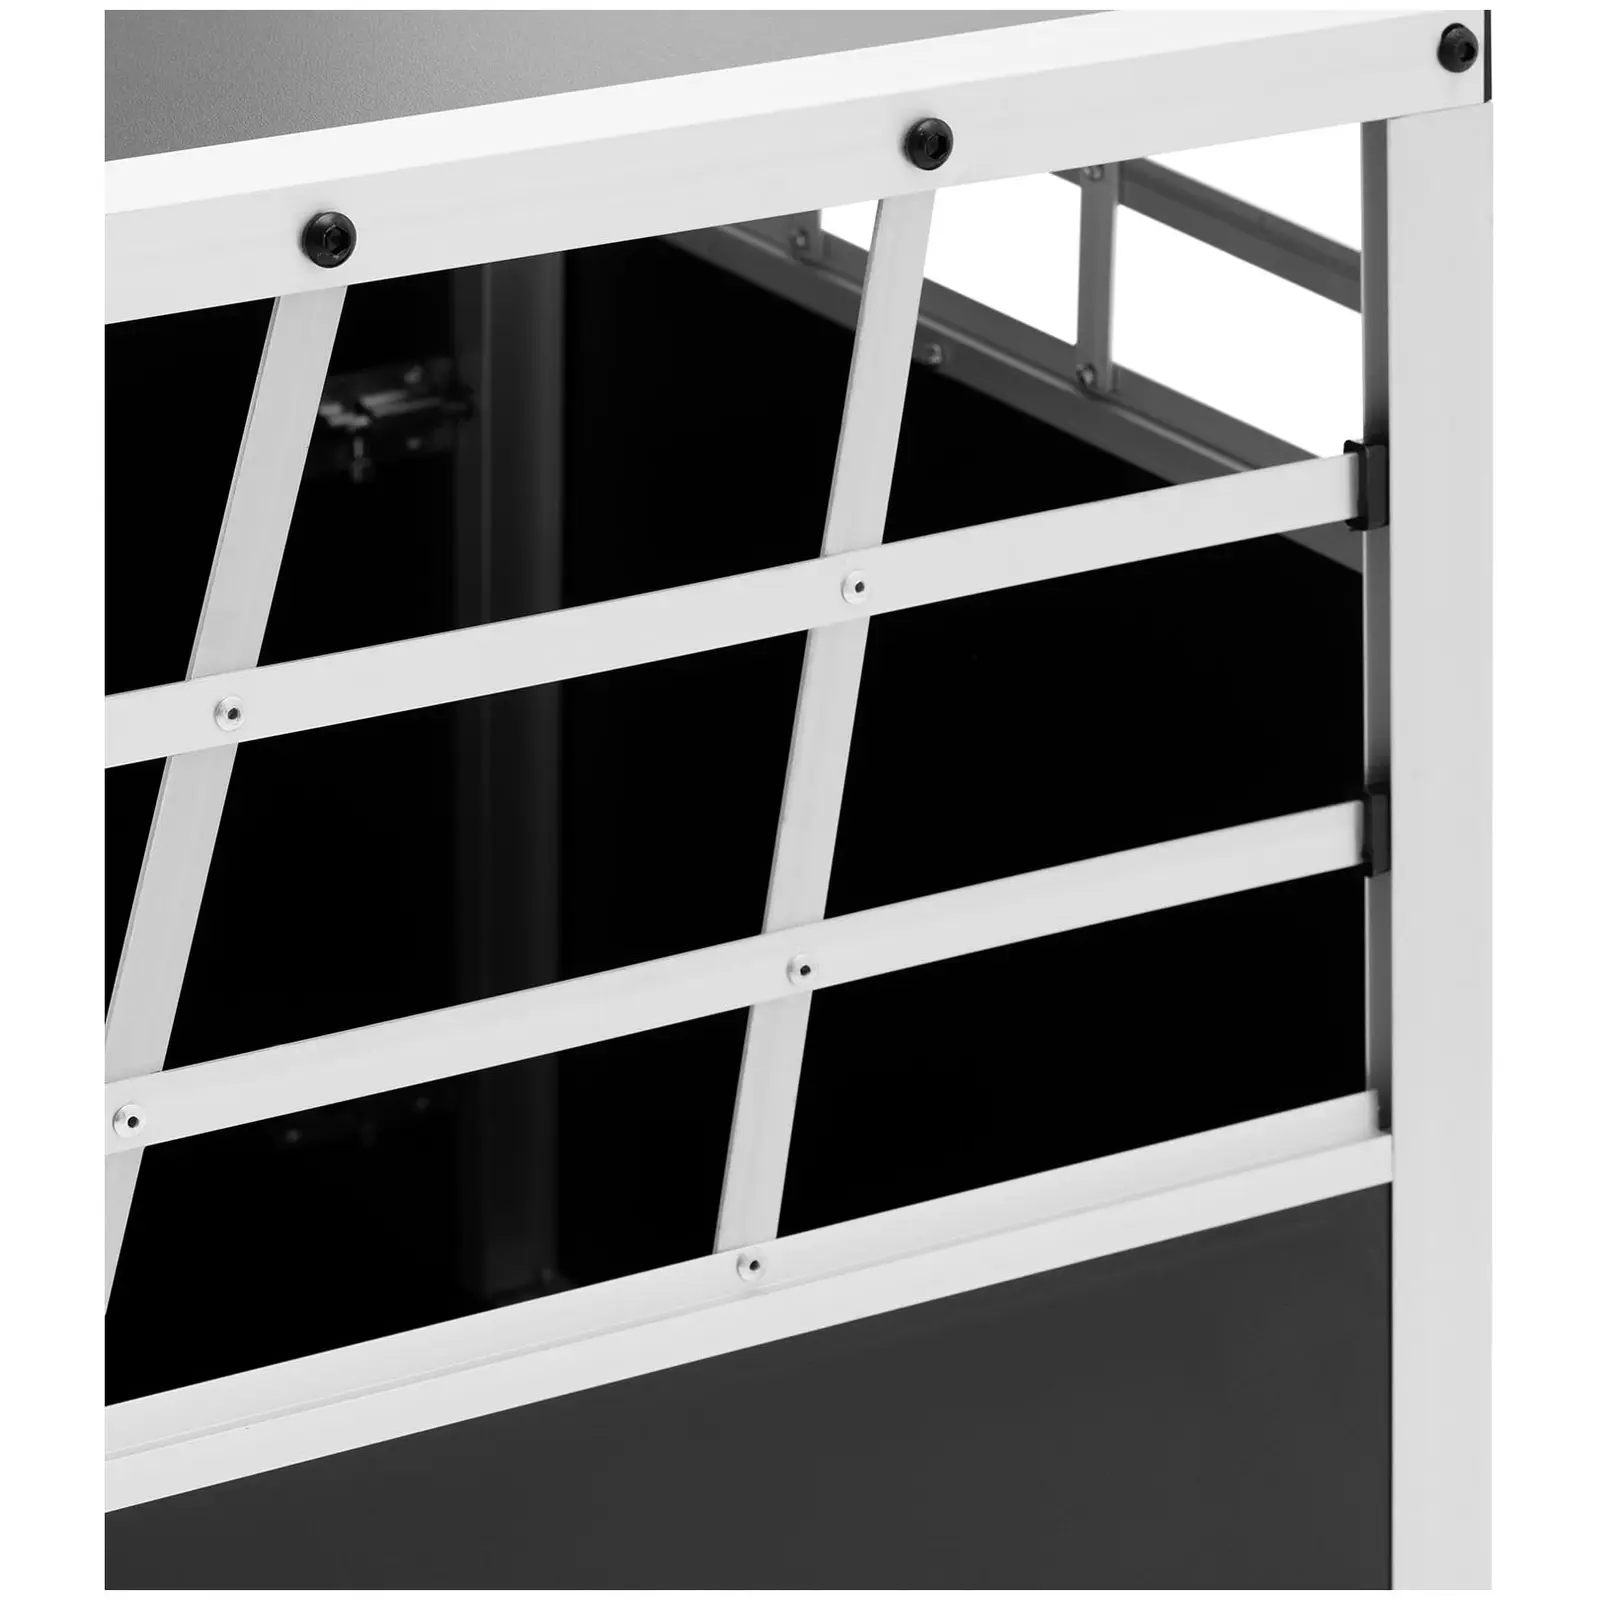 Dog Crate - Aluminium - Trapezoid shape - 70 x 90 x 50 cm - with divider